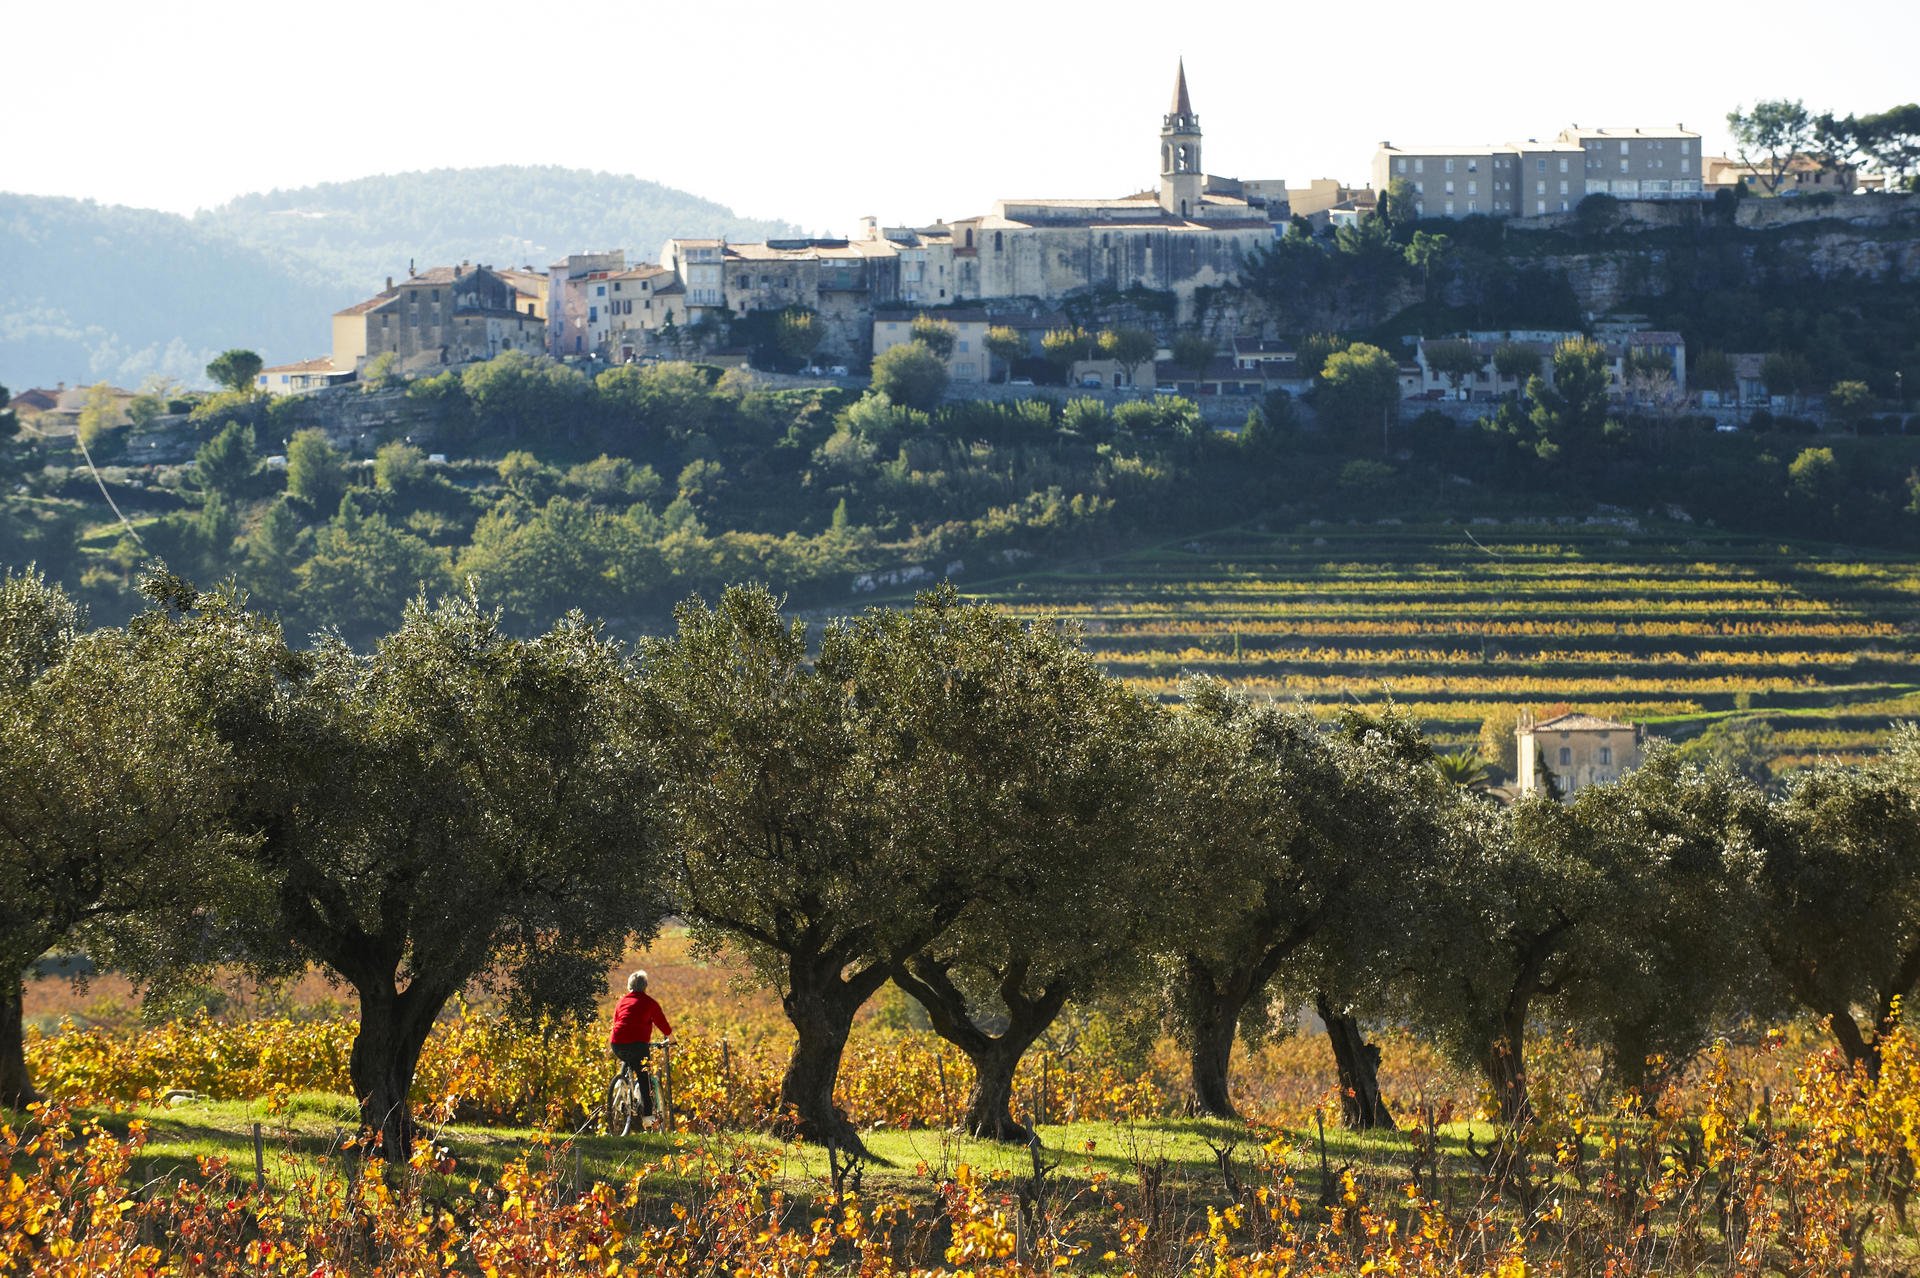 Vineyard at Le Castellet in the Bandol region of Provence. Photo: Corbis